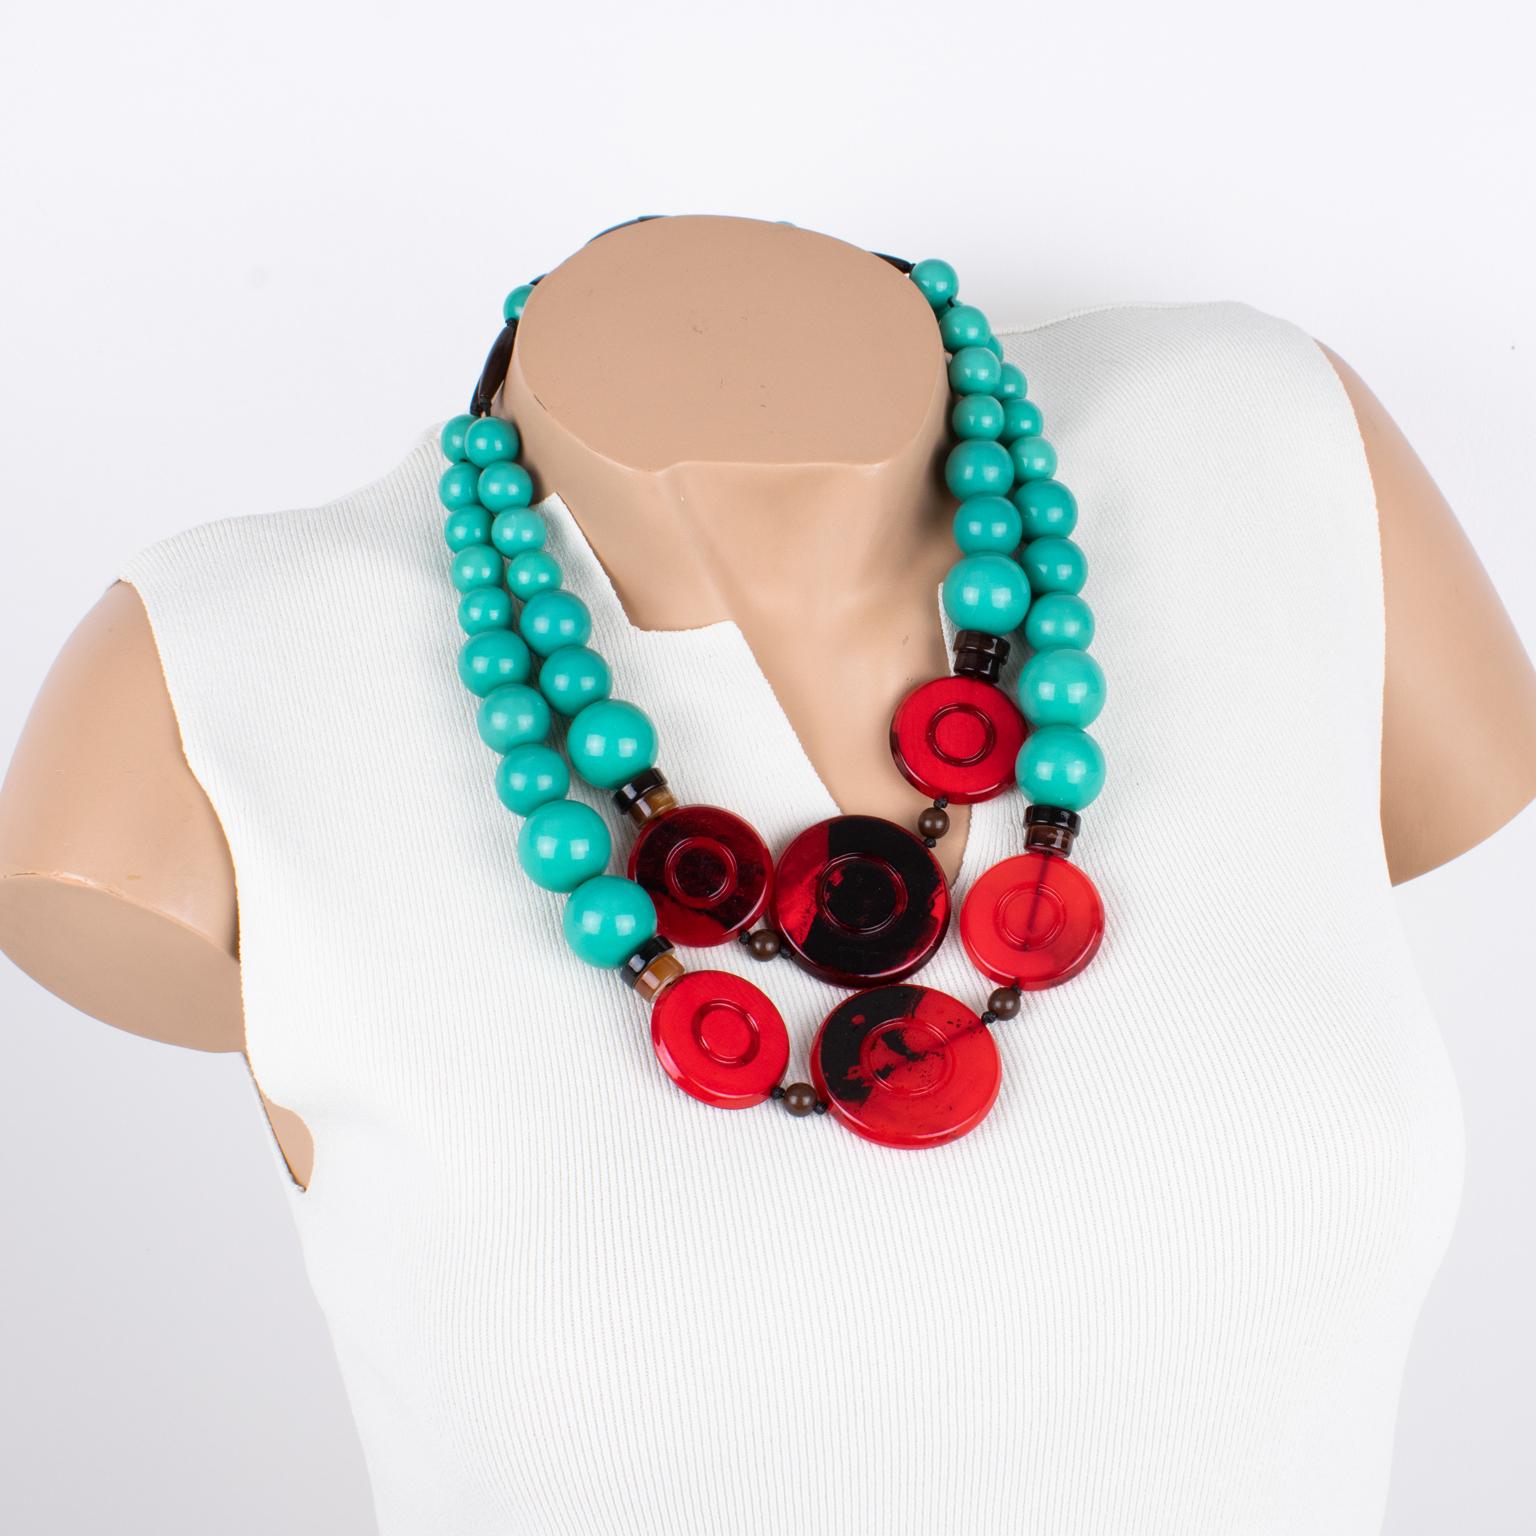 Angela Captui, Italy, designed this outstanding resin-beaded necklace. The choker color is predominantly teal green with a striking contrast of red and black. Each rounded pebble bead is carved and dimensional. Her color matching is always extremely